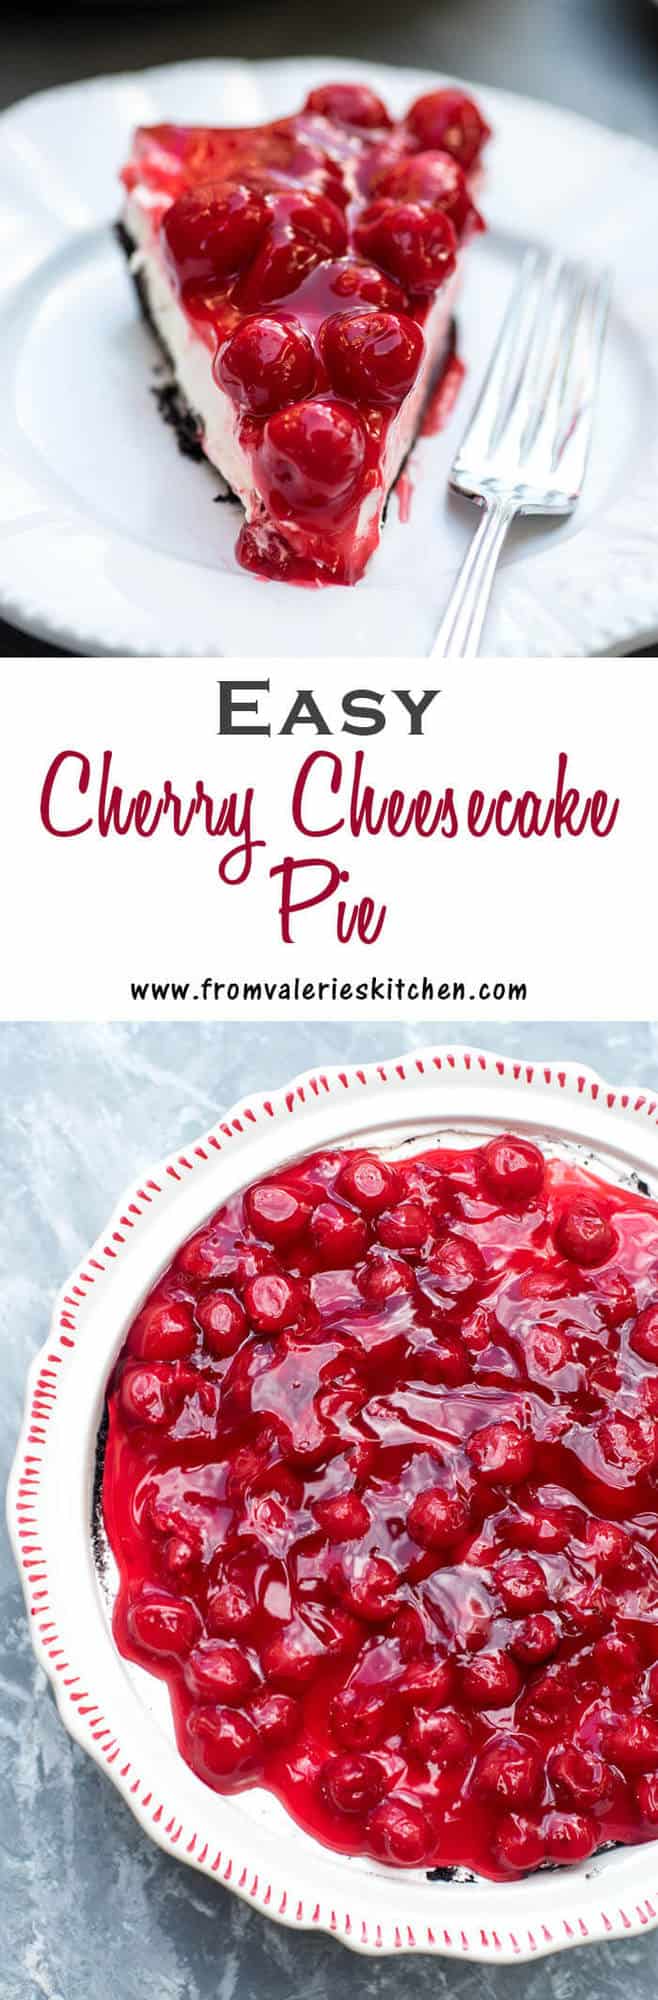 A two image collage of Easy Cherry Cheesecake Pie with a Chocolate Crust with text overlay/